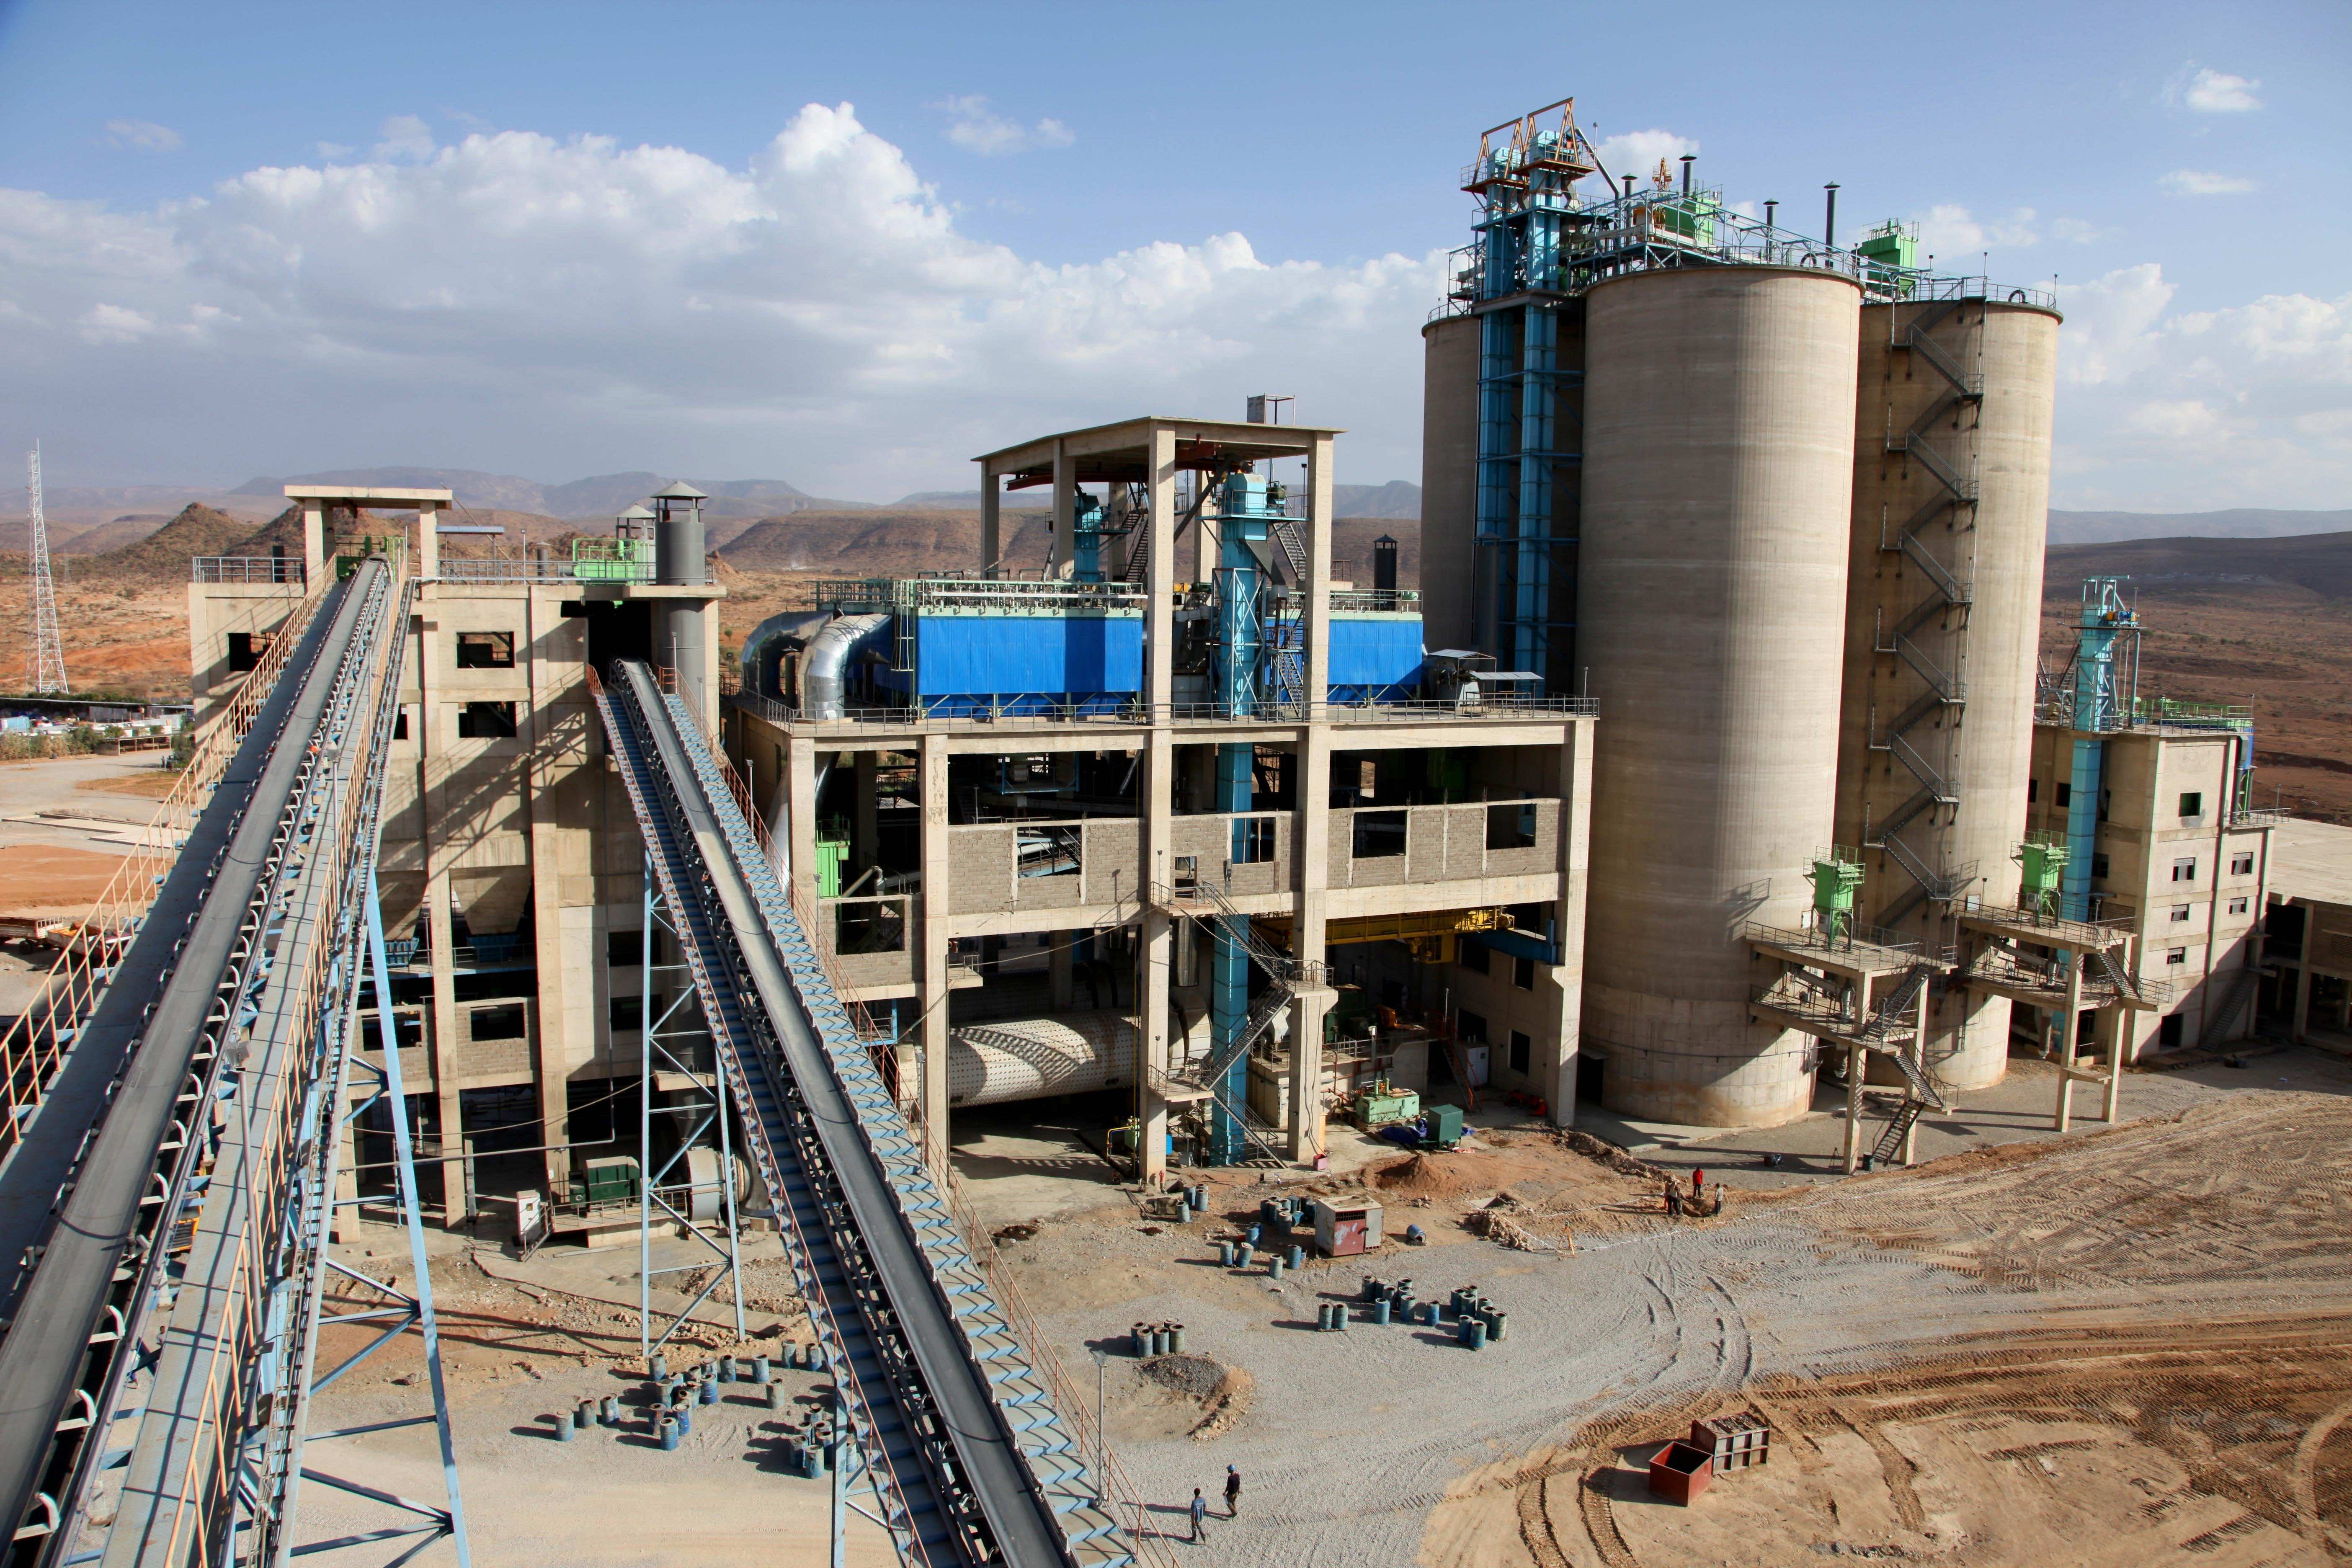 New cement factory opens in Ethiopia - one of Africa's fastest-growing nations